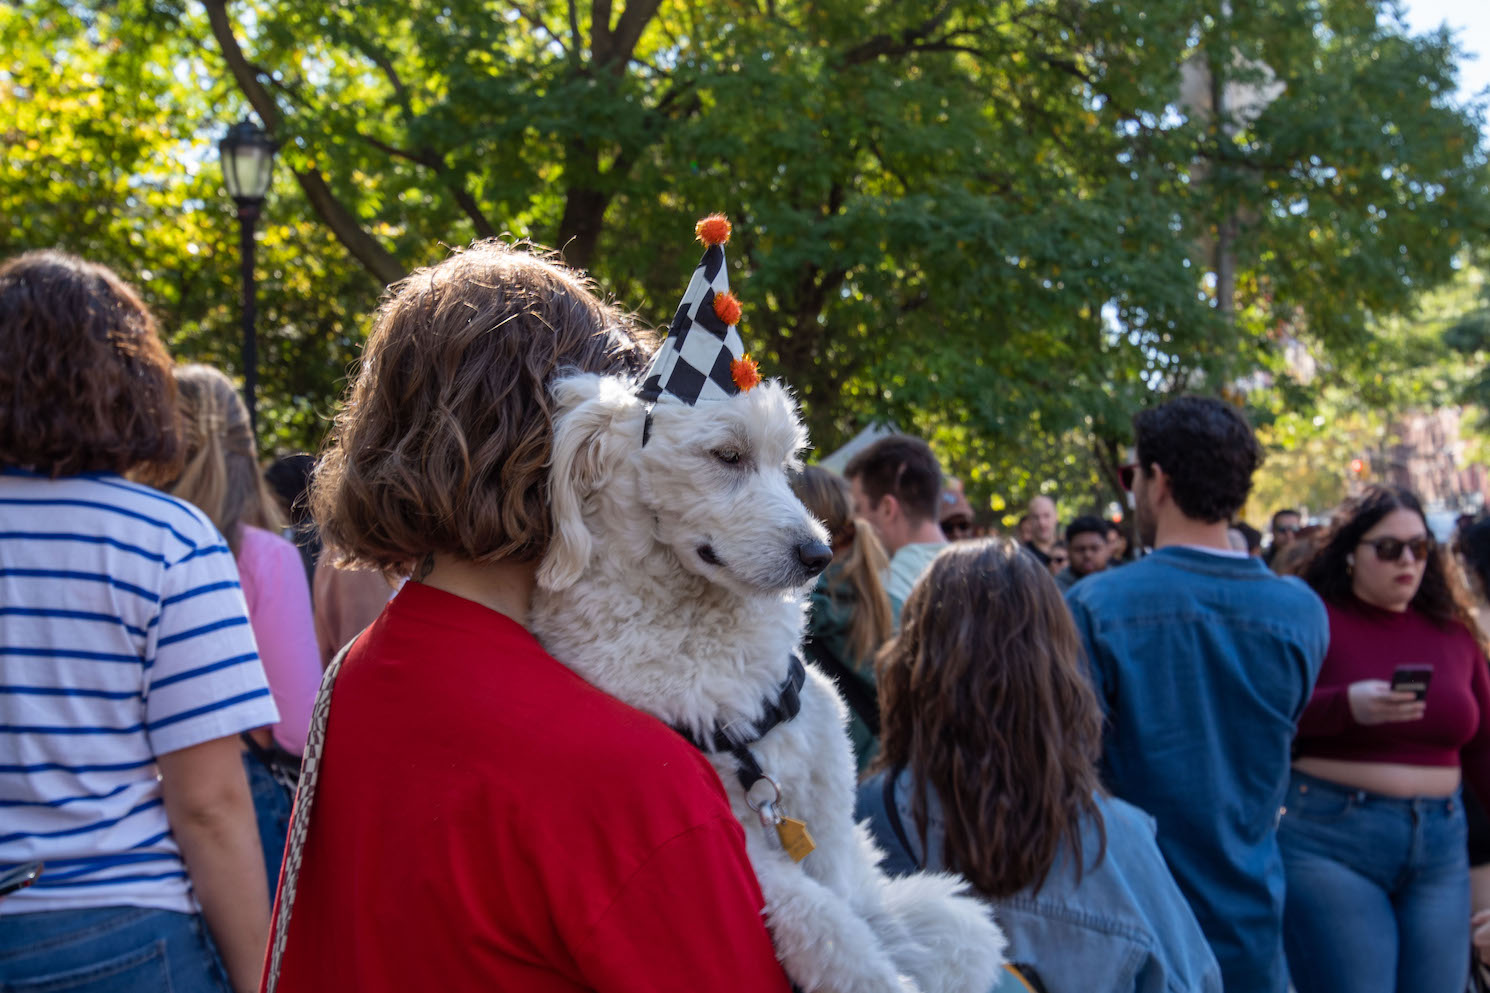 The back of a figure with short, wavy brown hair wears a red sweater while carrying a large, white dog through a crowd of people outside of Tompkins Square Park. The dog wears a harlequin party hat and a black collar.